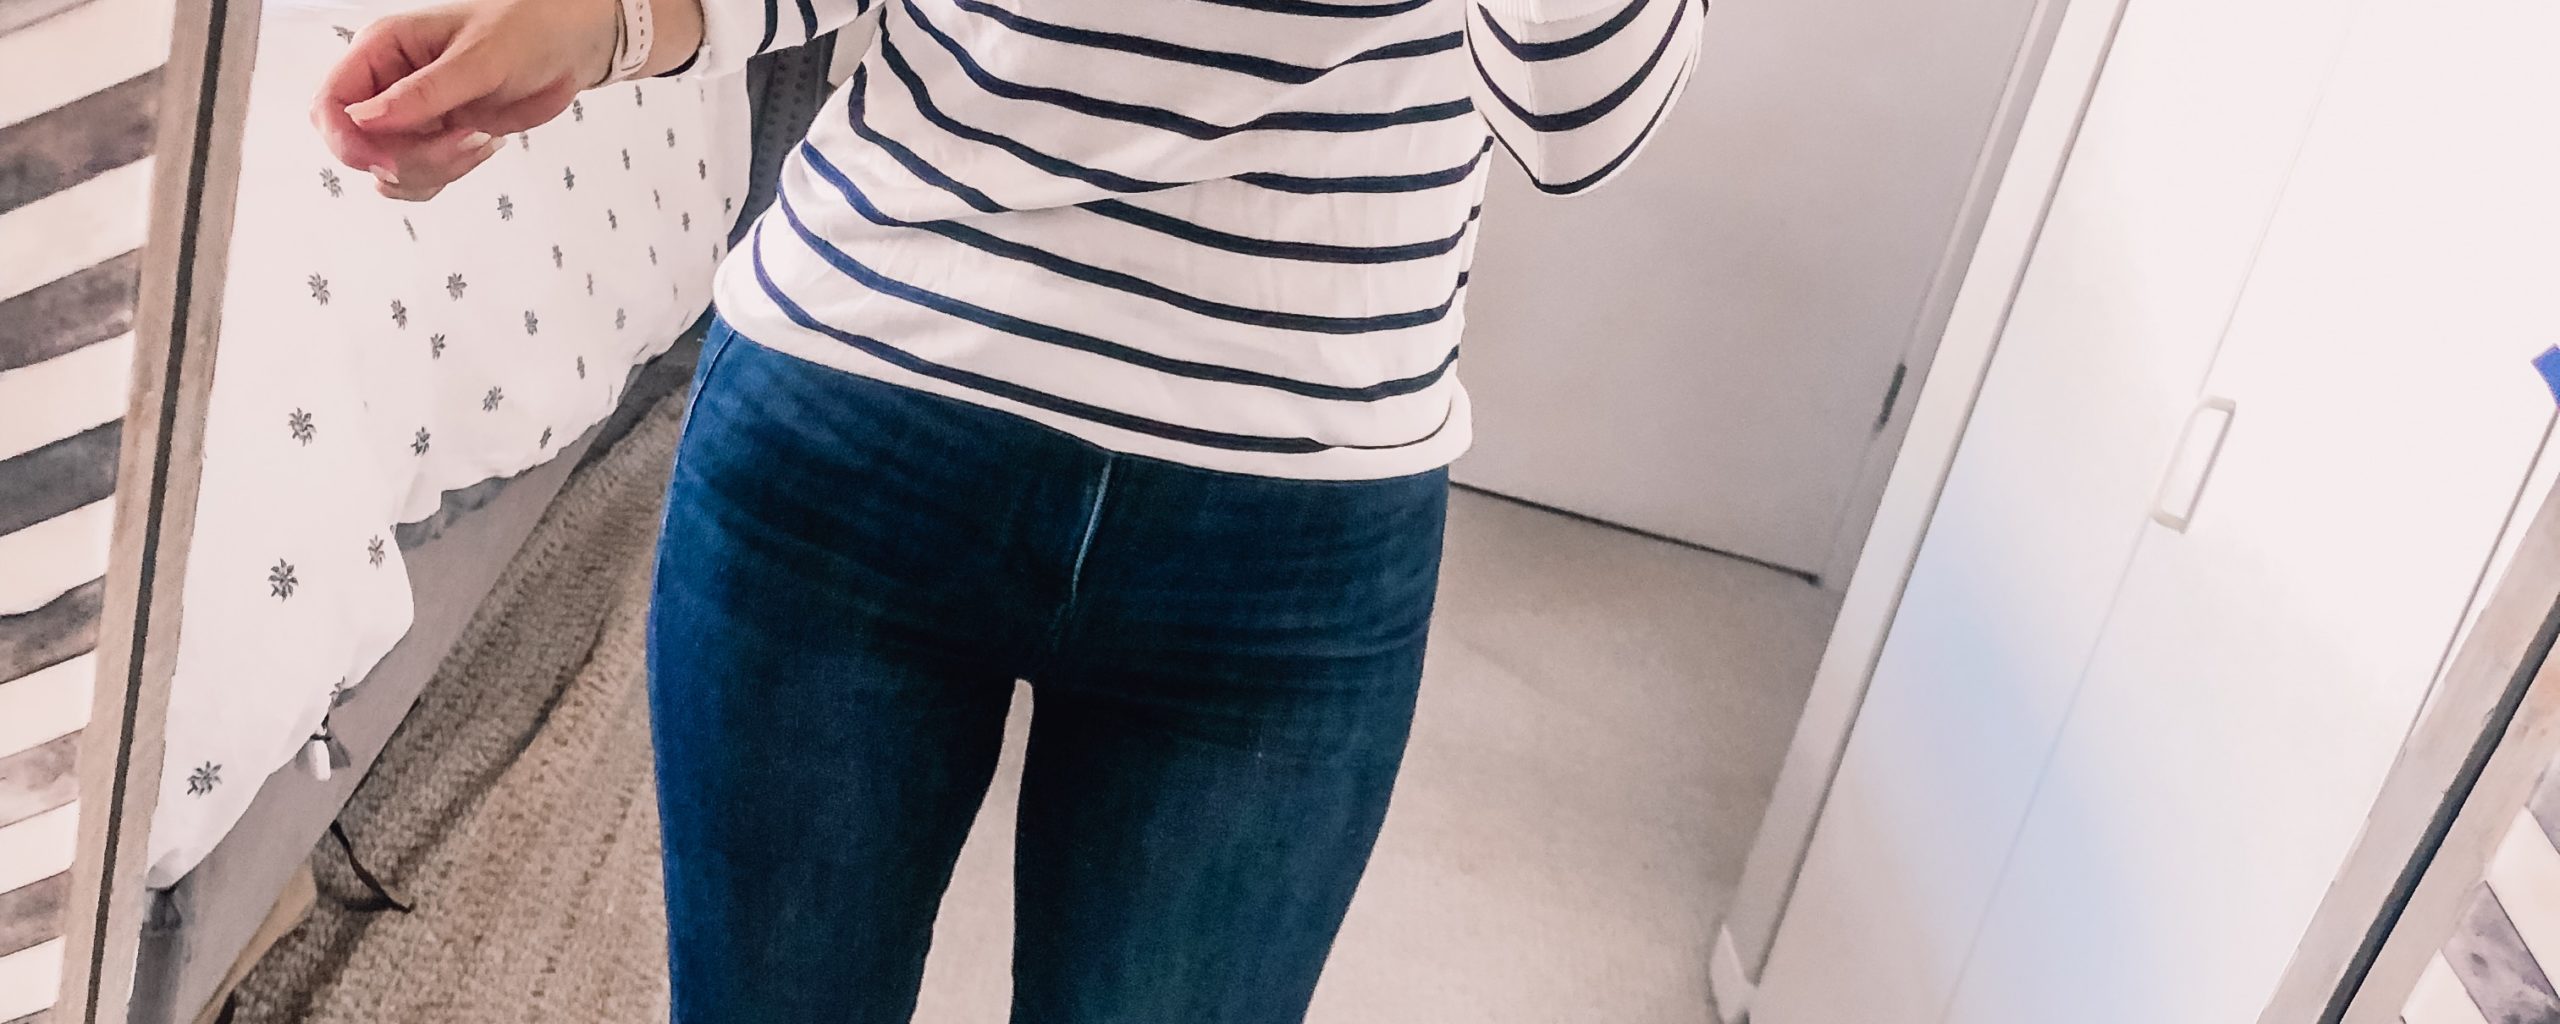 striped sweater and skinny jeans